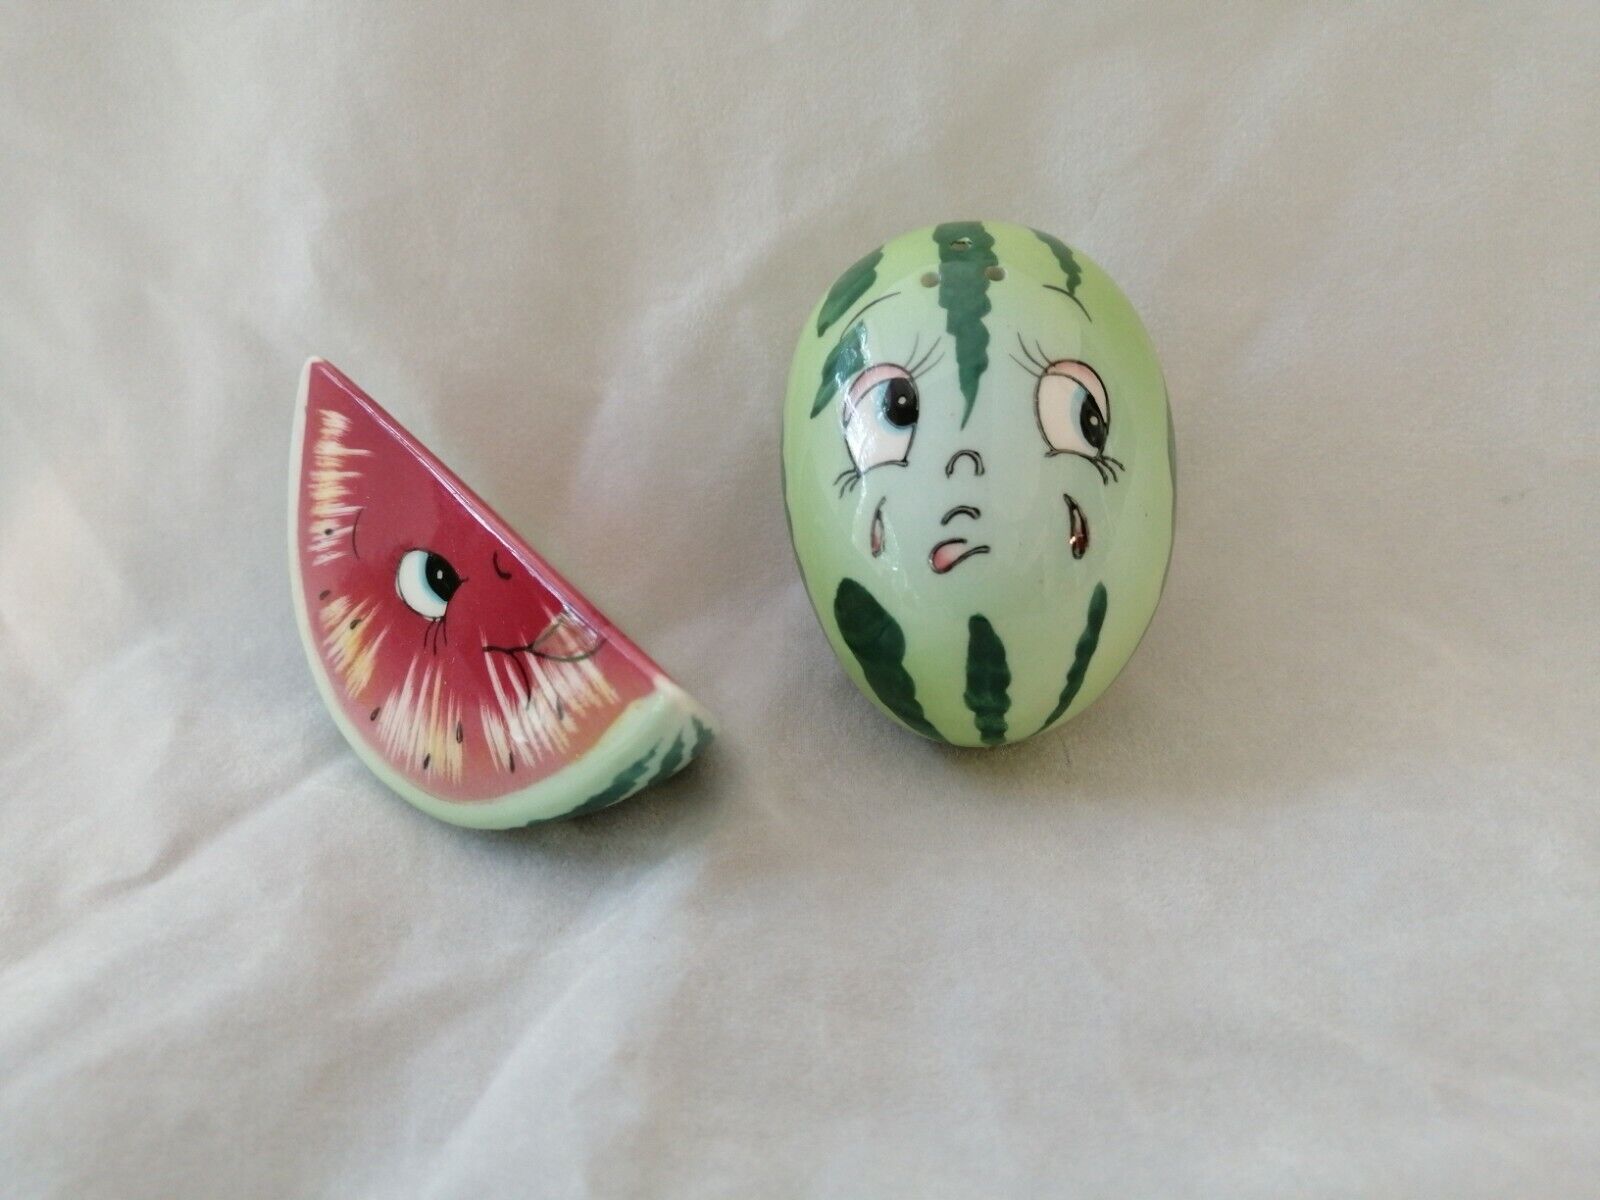 VINTAGE ANTHROPOMORPHIC PY WATERMELON AND SLICE OF MELON SALT AND PEPPER SHAKERS